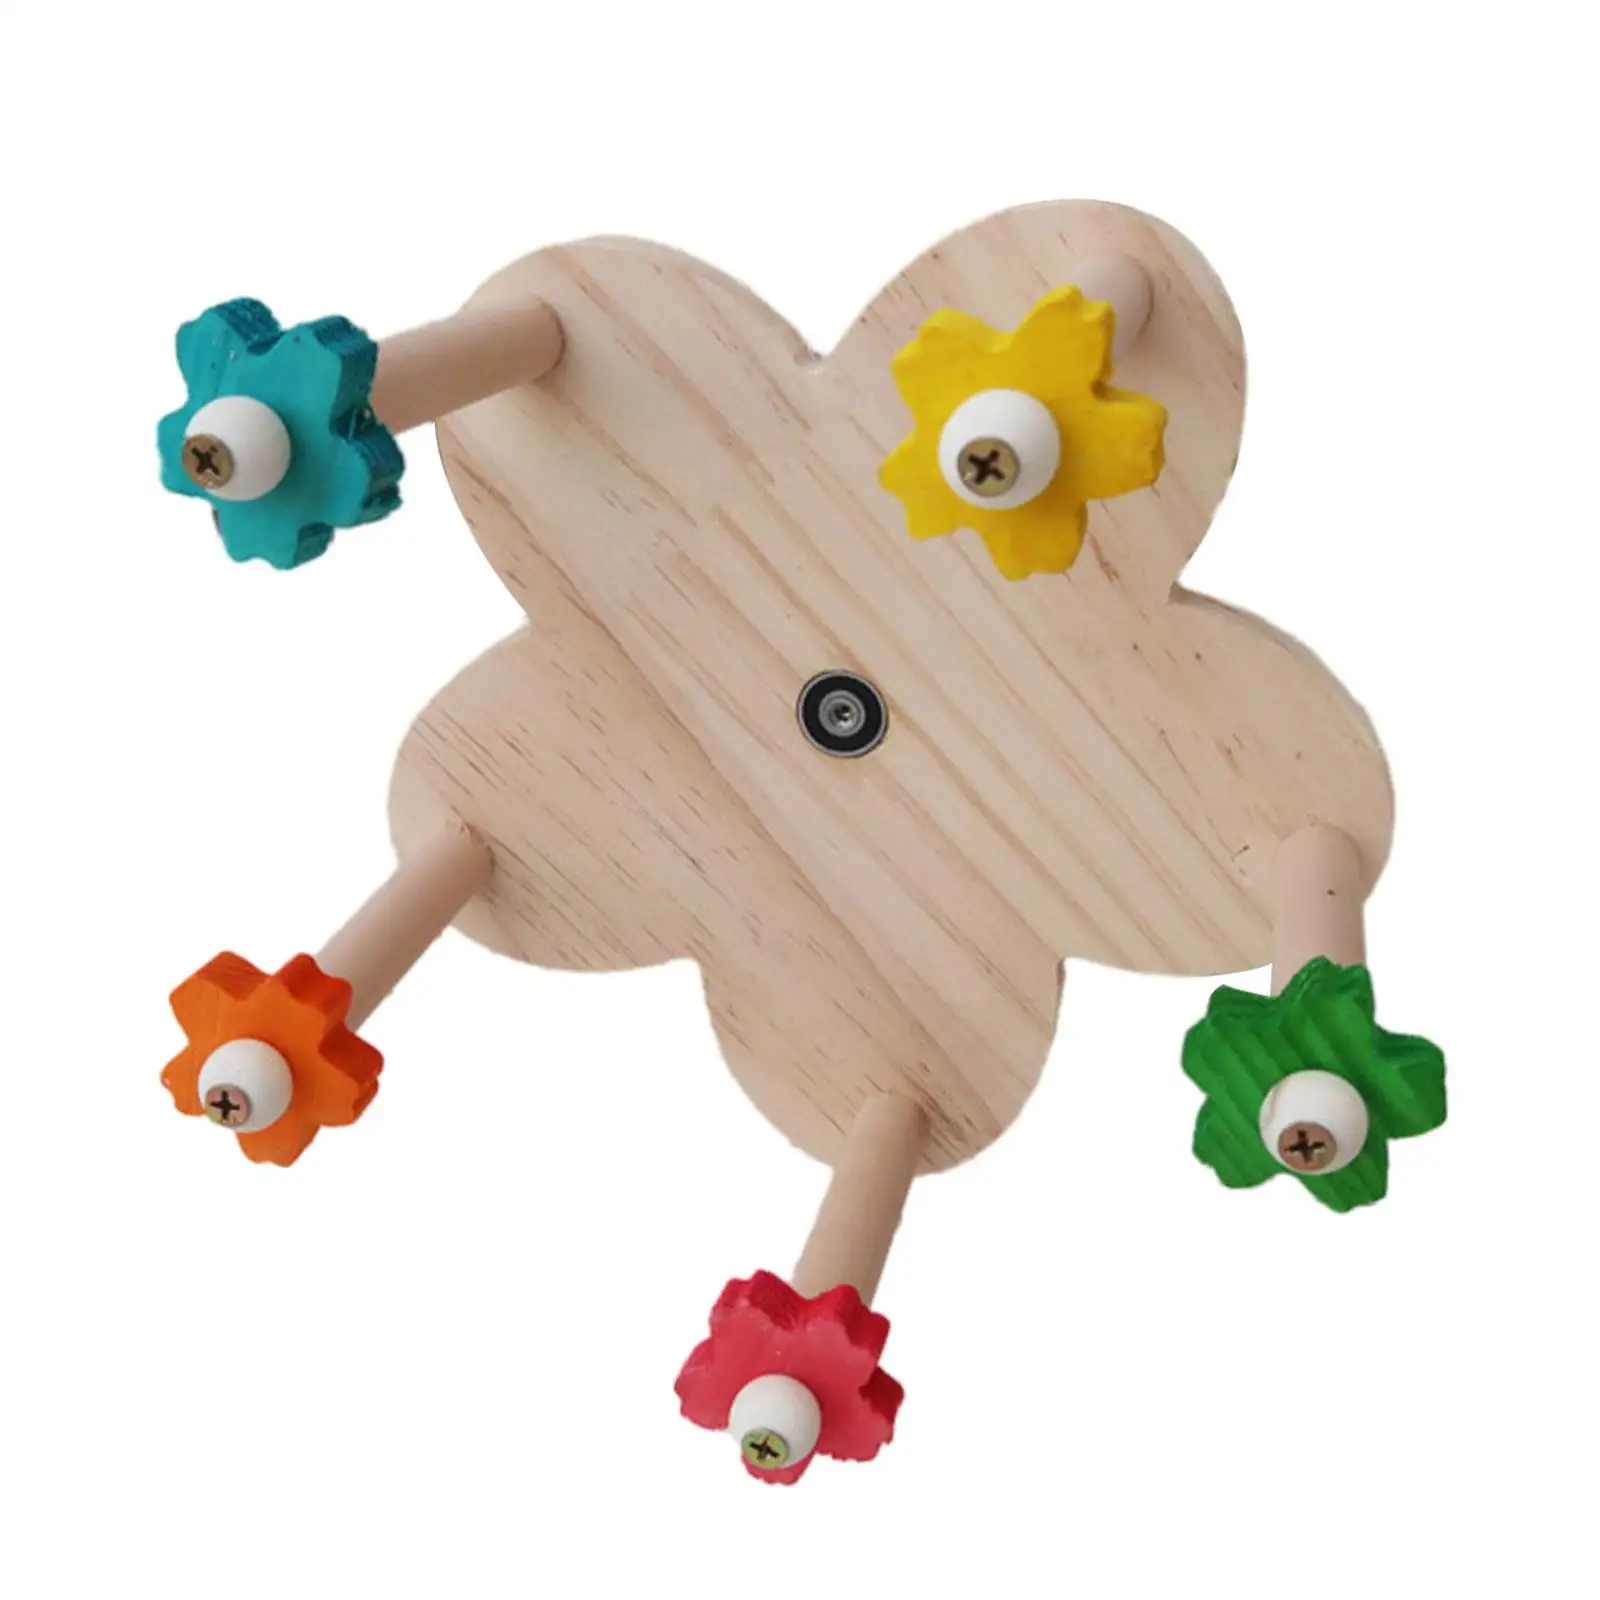 Parrot Perch Wheel Toy Unique Bird Perch Stand for Macaws Lovebirds Budgies